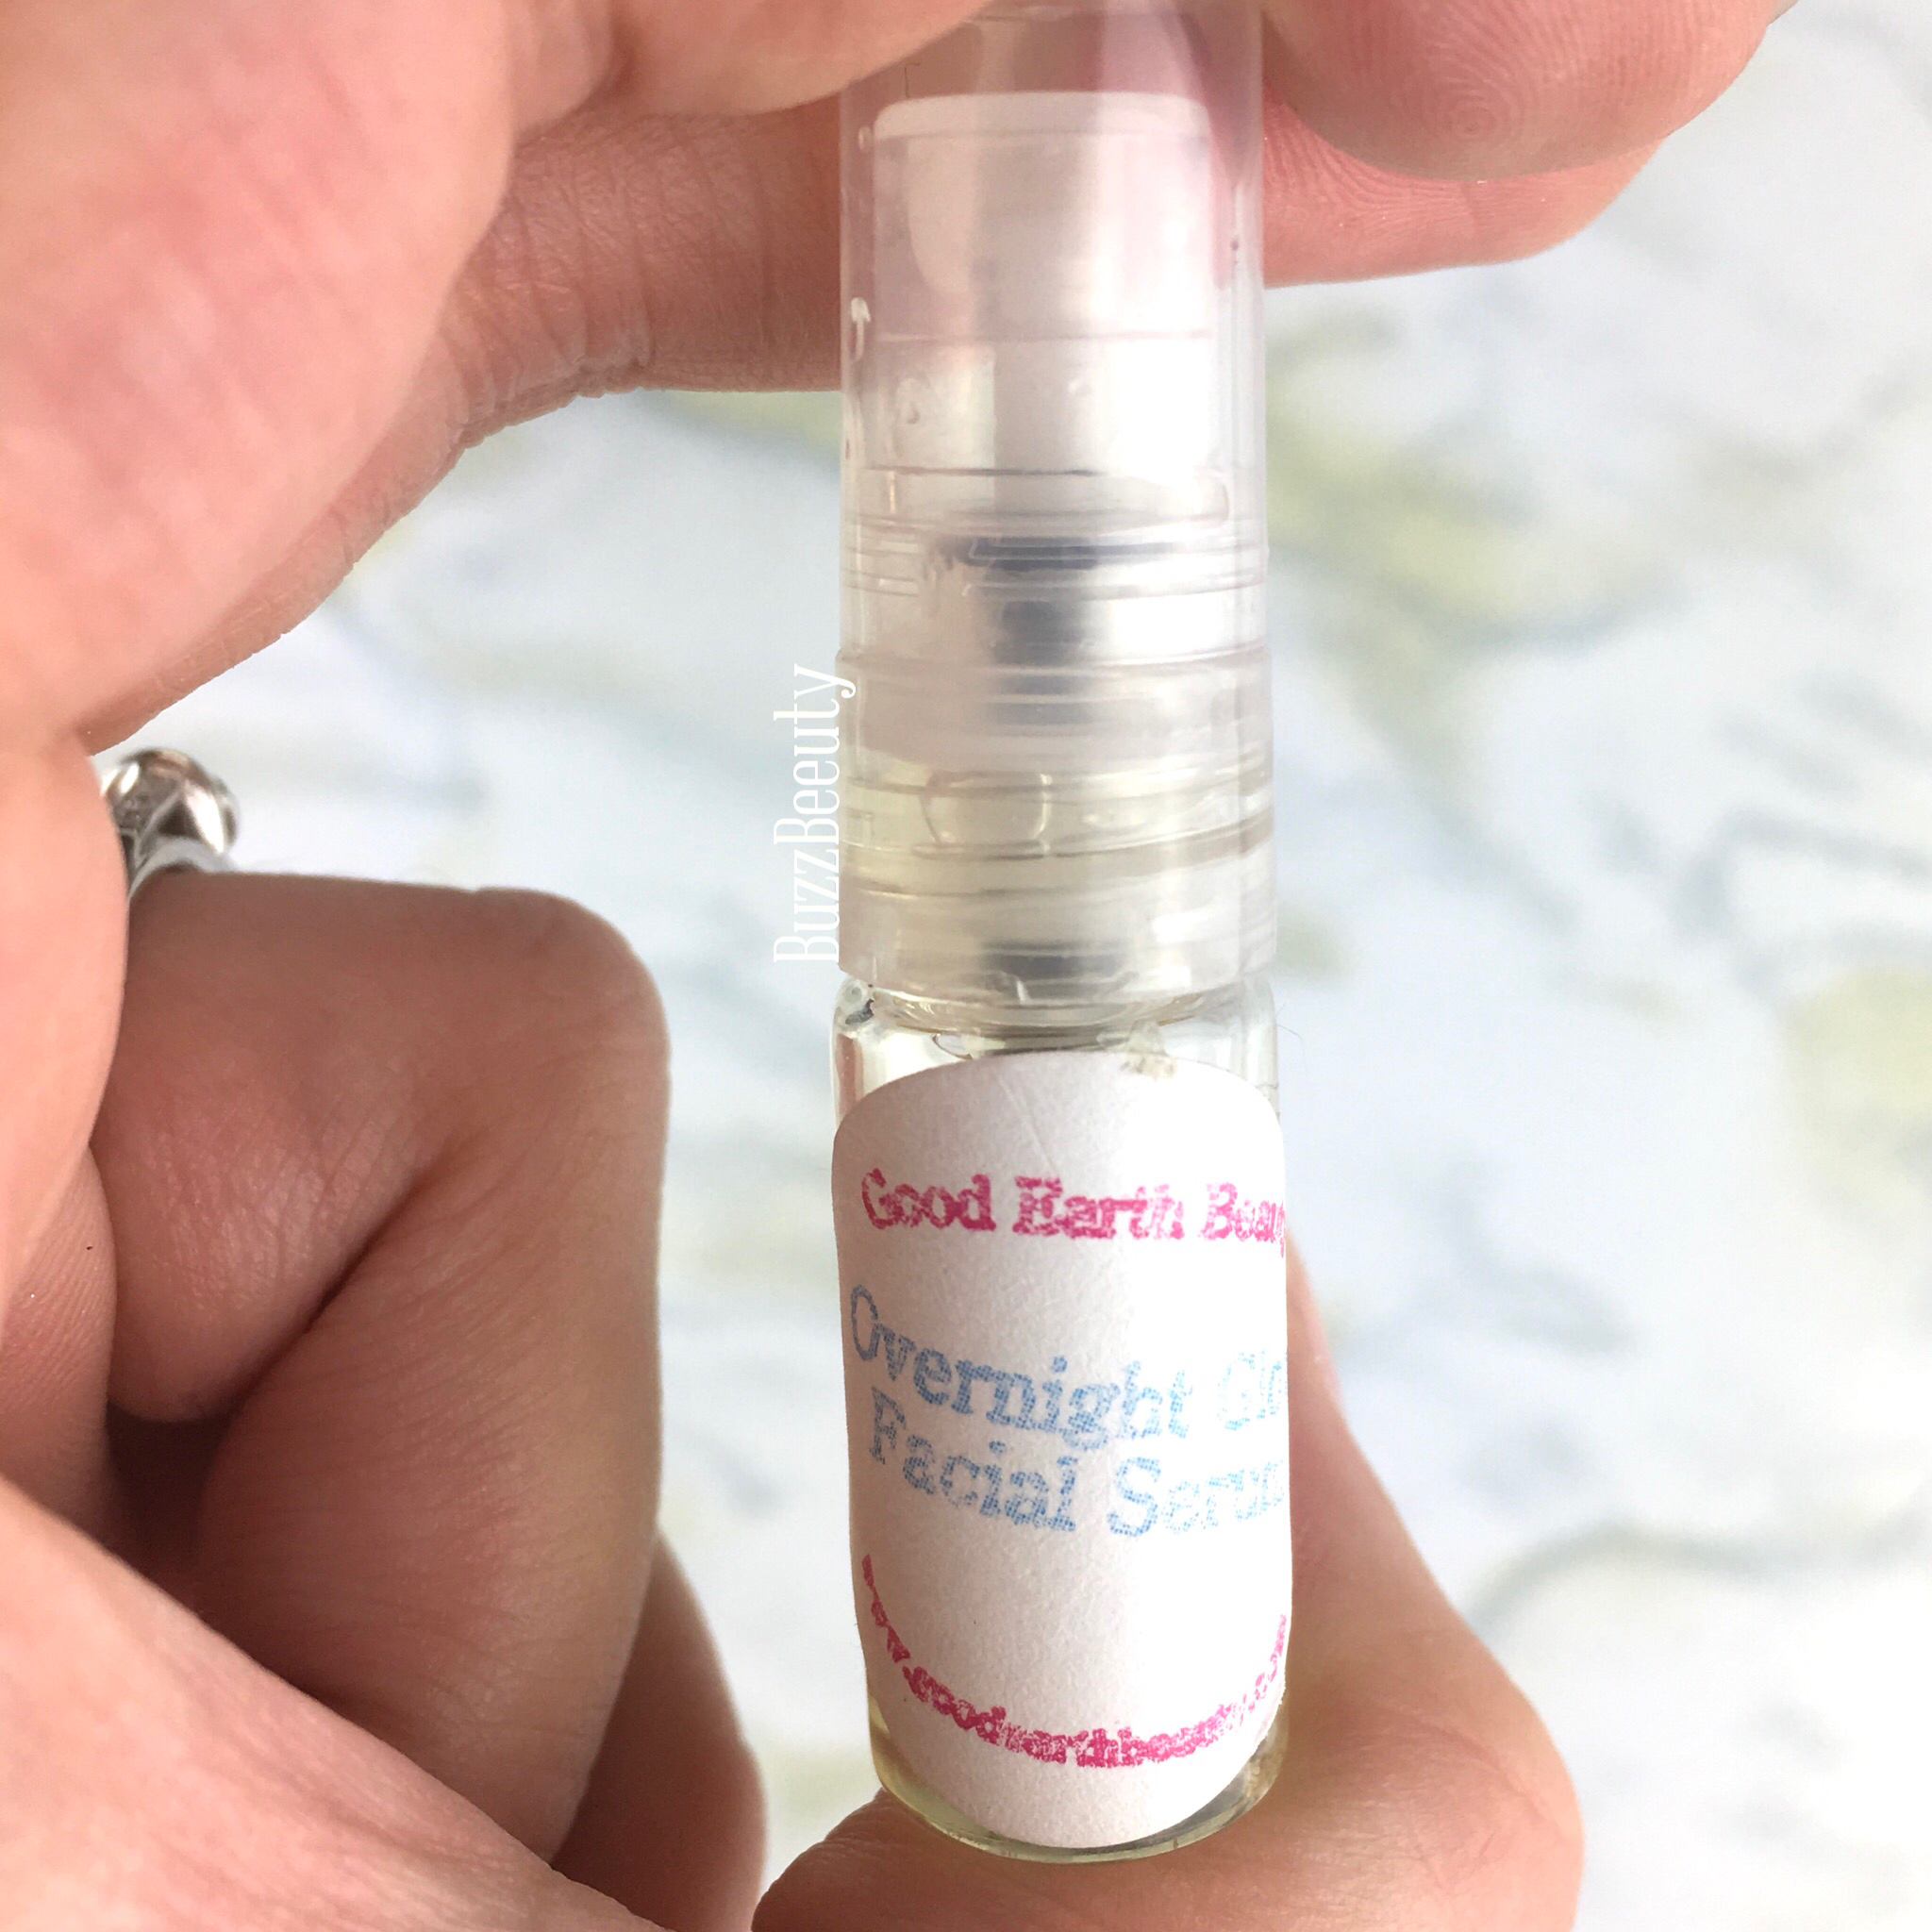 Good Earth Beauty Overnight Face Serum Review